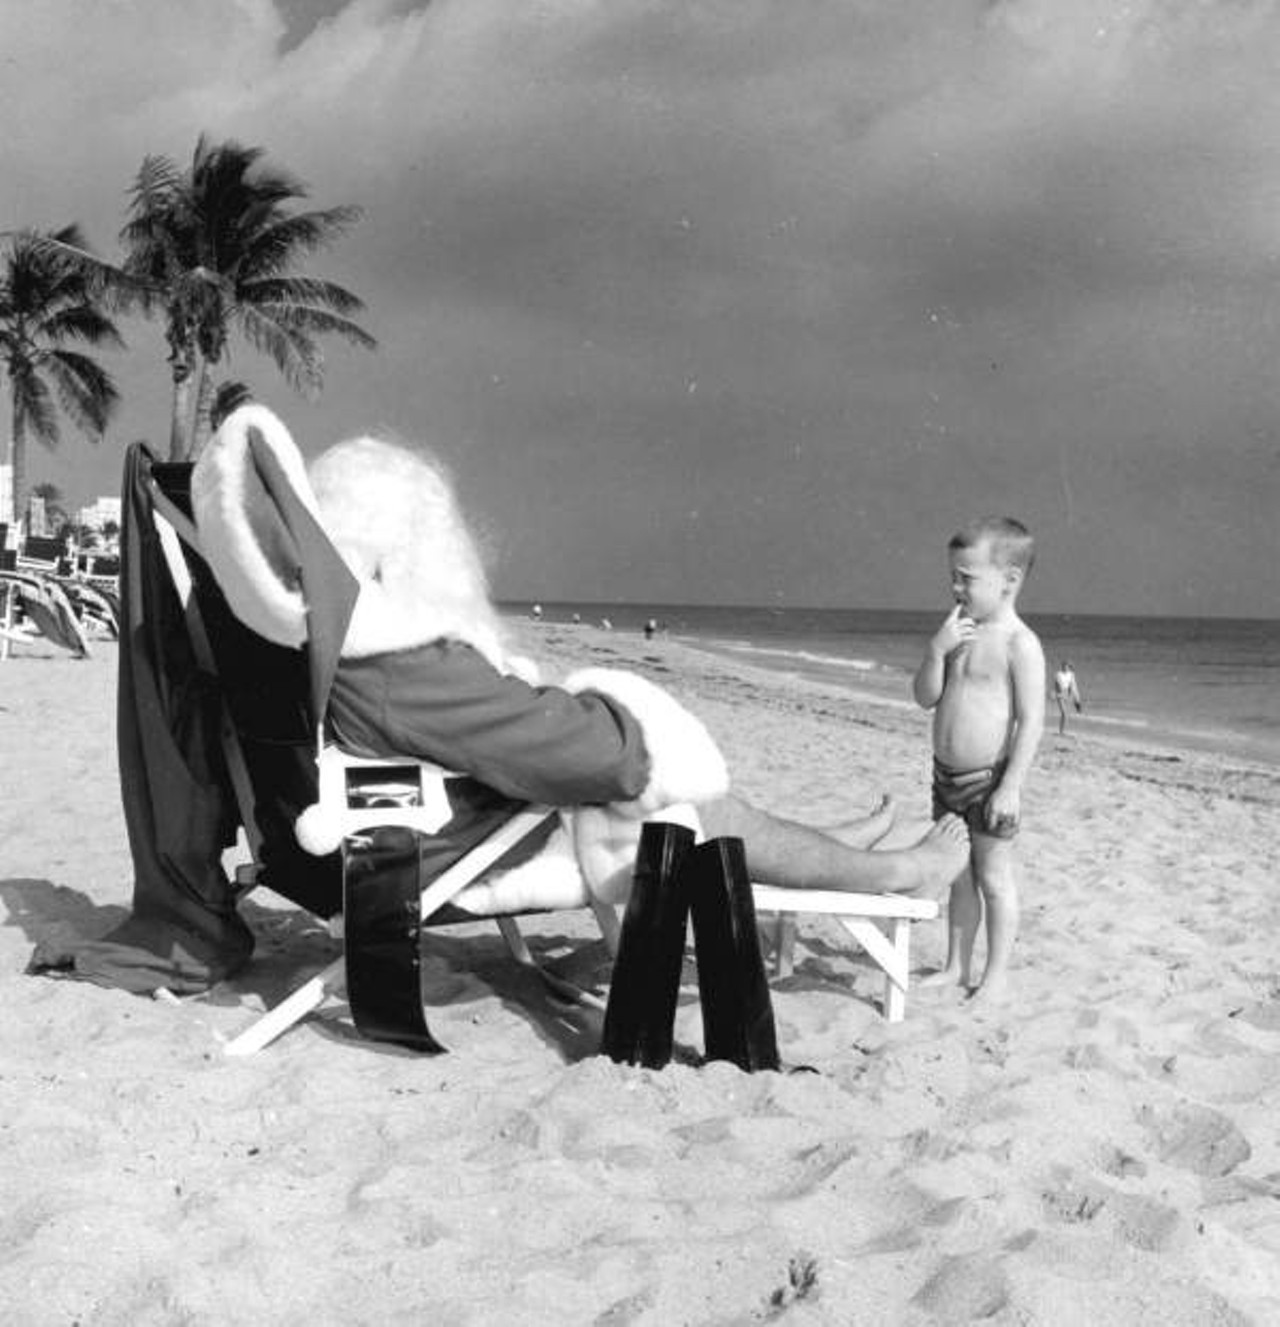 30 vintage pics of Florida Santas from the state archives